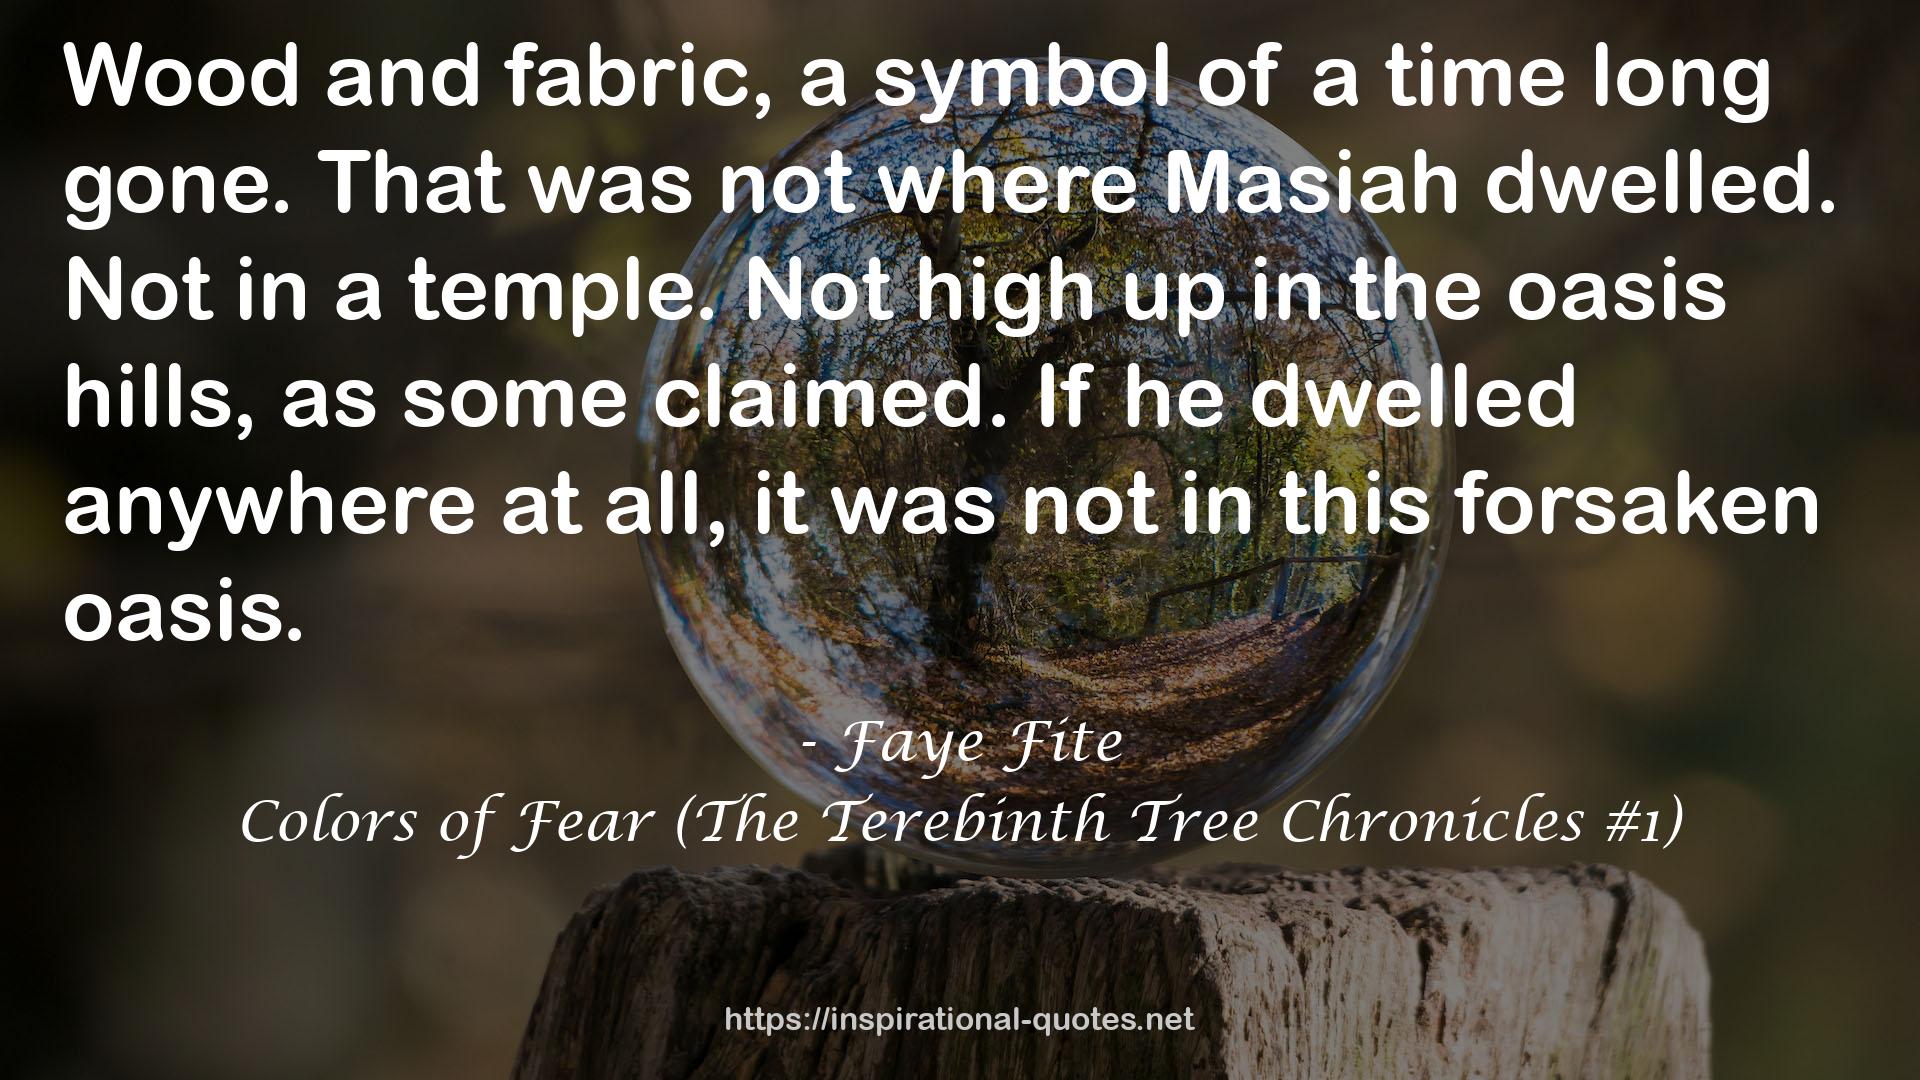 Colors of Fear (The Terebinth Tree Chronicles #1) QUOTES